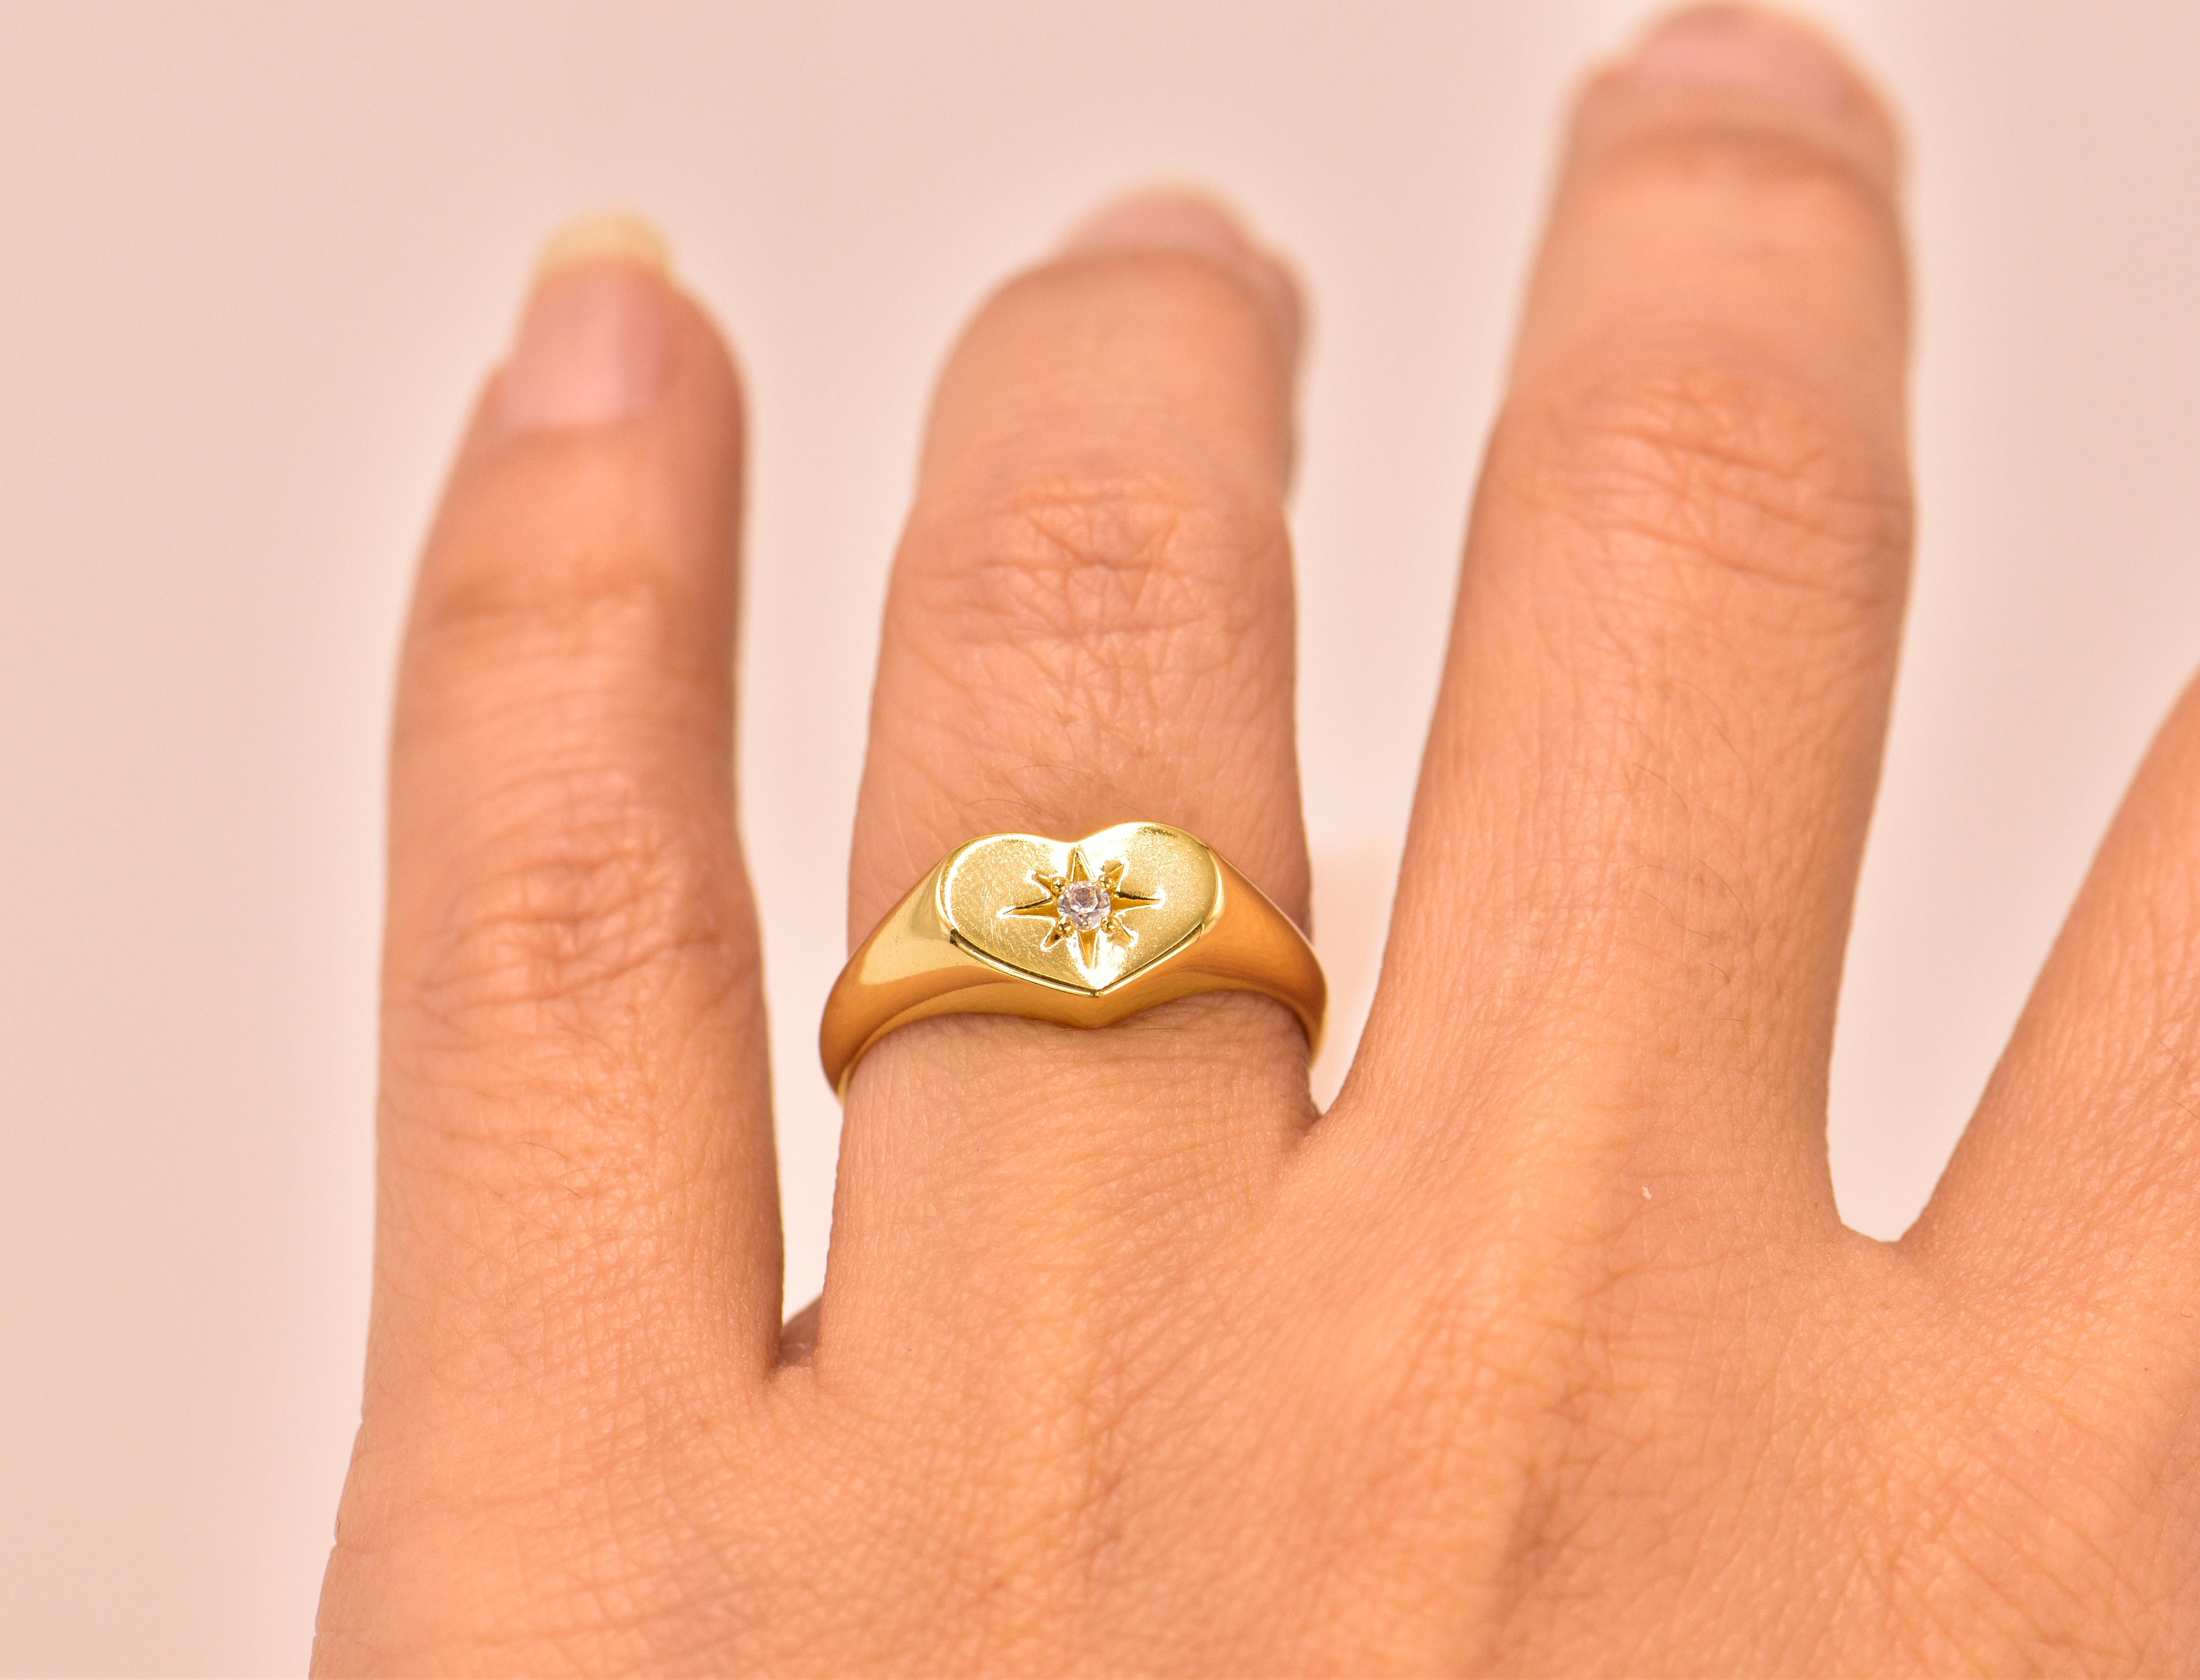 For Sale:  18K Genuine Gold Filled Heart Shape Signet Ring with 0.03 Carat Natural Diamond 8